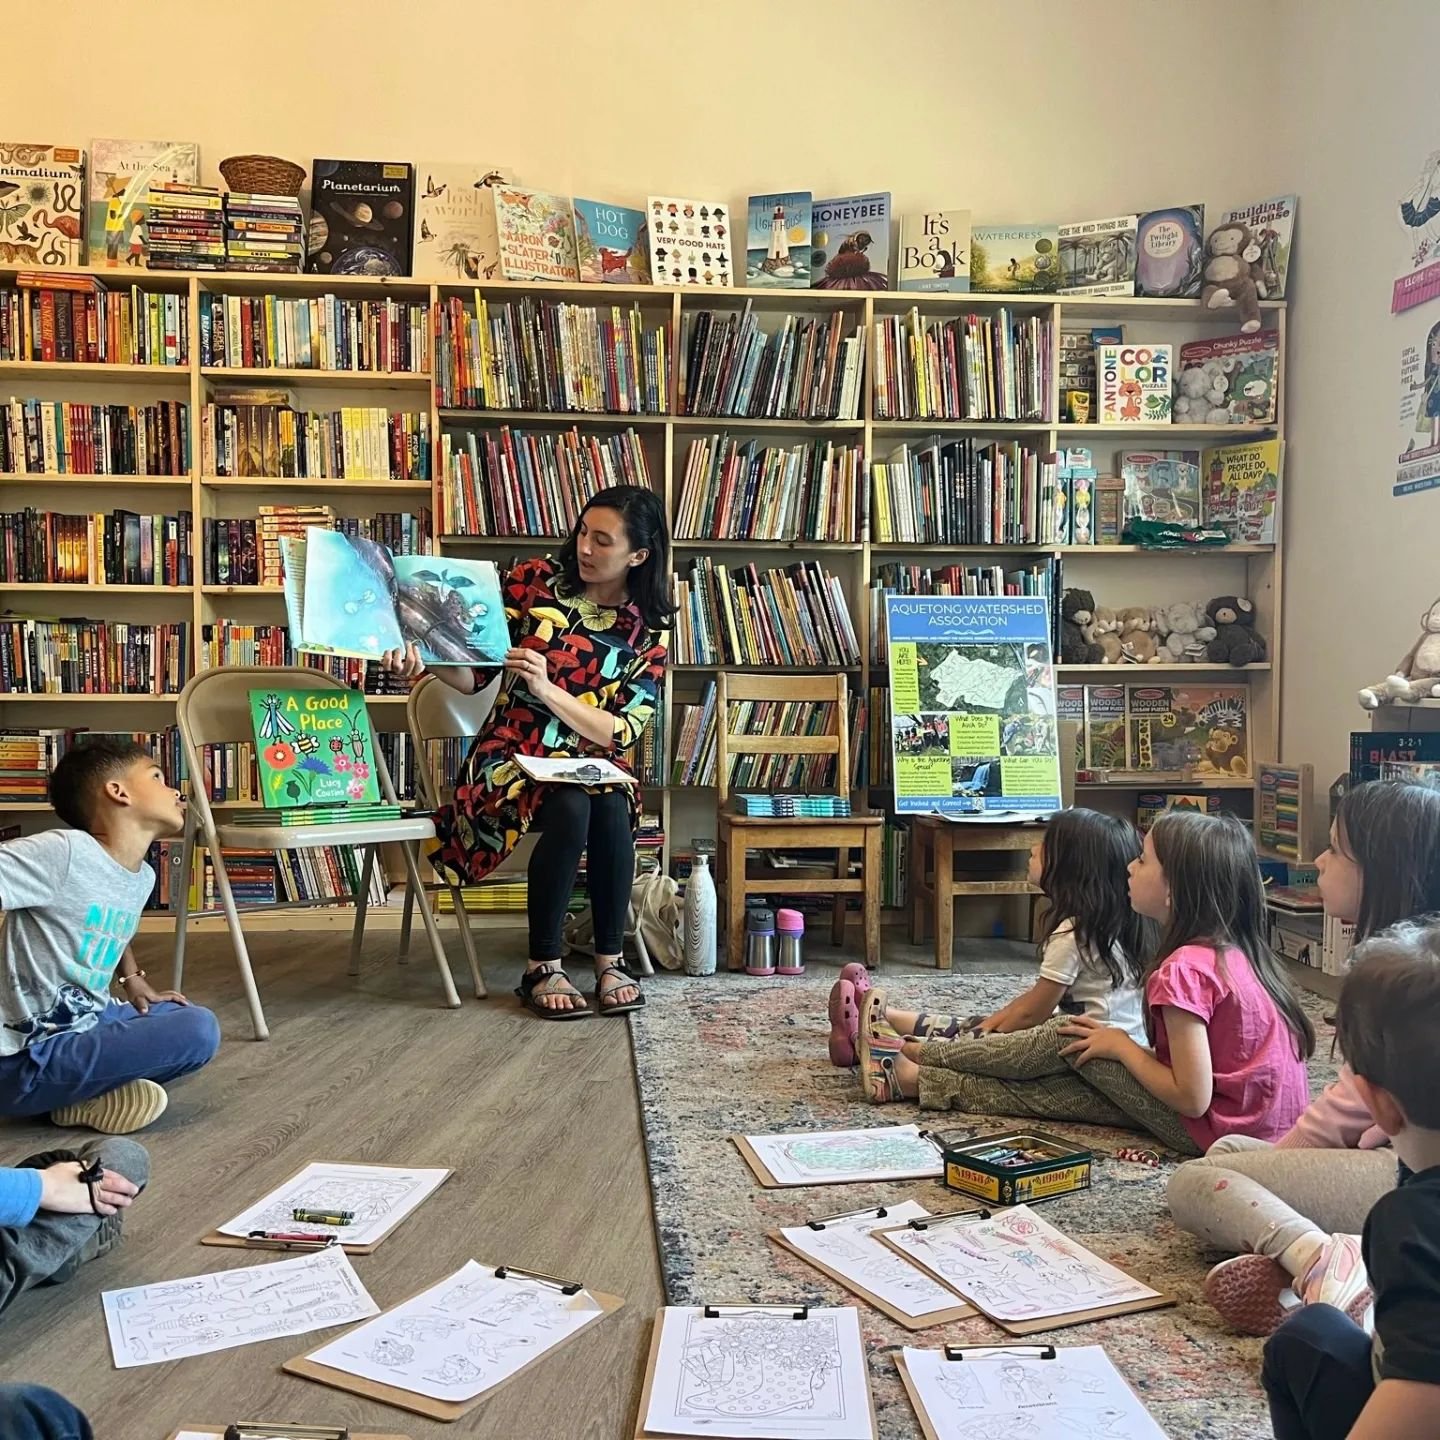 Celebrate Earth Day with a special storytime this upcoming Monday 4/22 at 2pm at Farley's @farleysbookshop! Join the Aquetong Watershed Association @aquetongwsa for some great stories about appreciating our environment. All ages are welcome! See you 